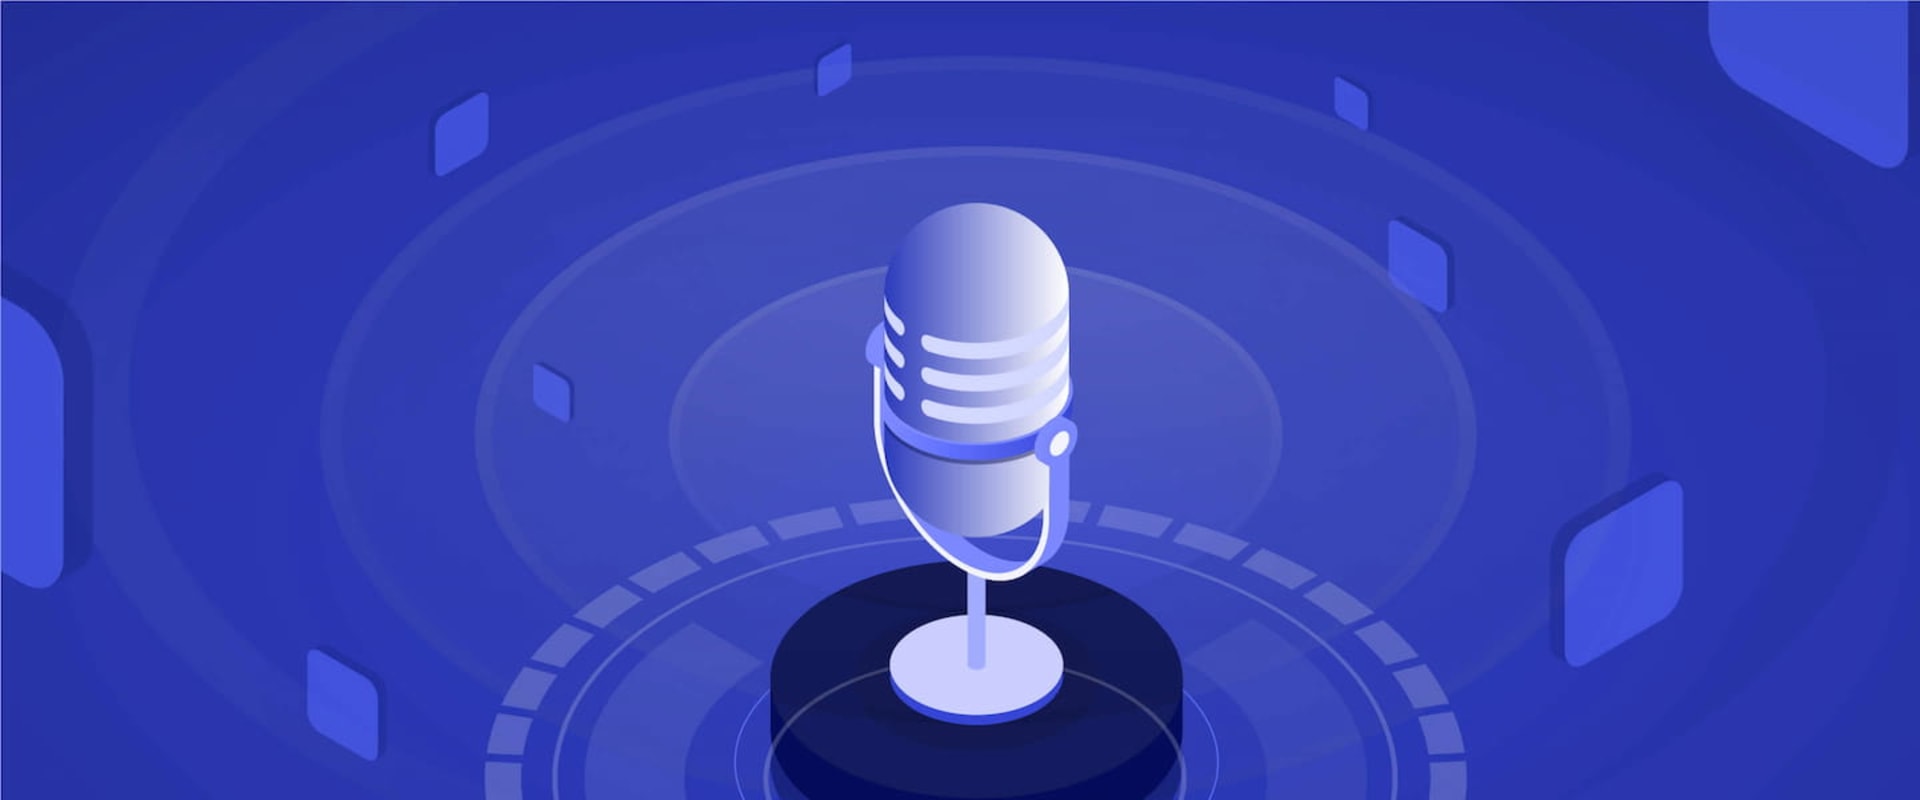 How can i use voice search optimization (vseo) in my digital campaigns?